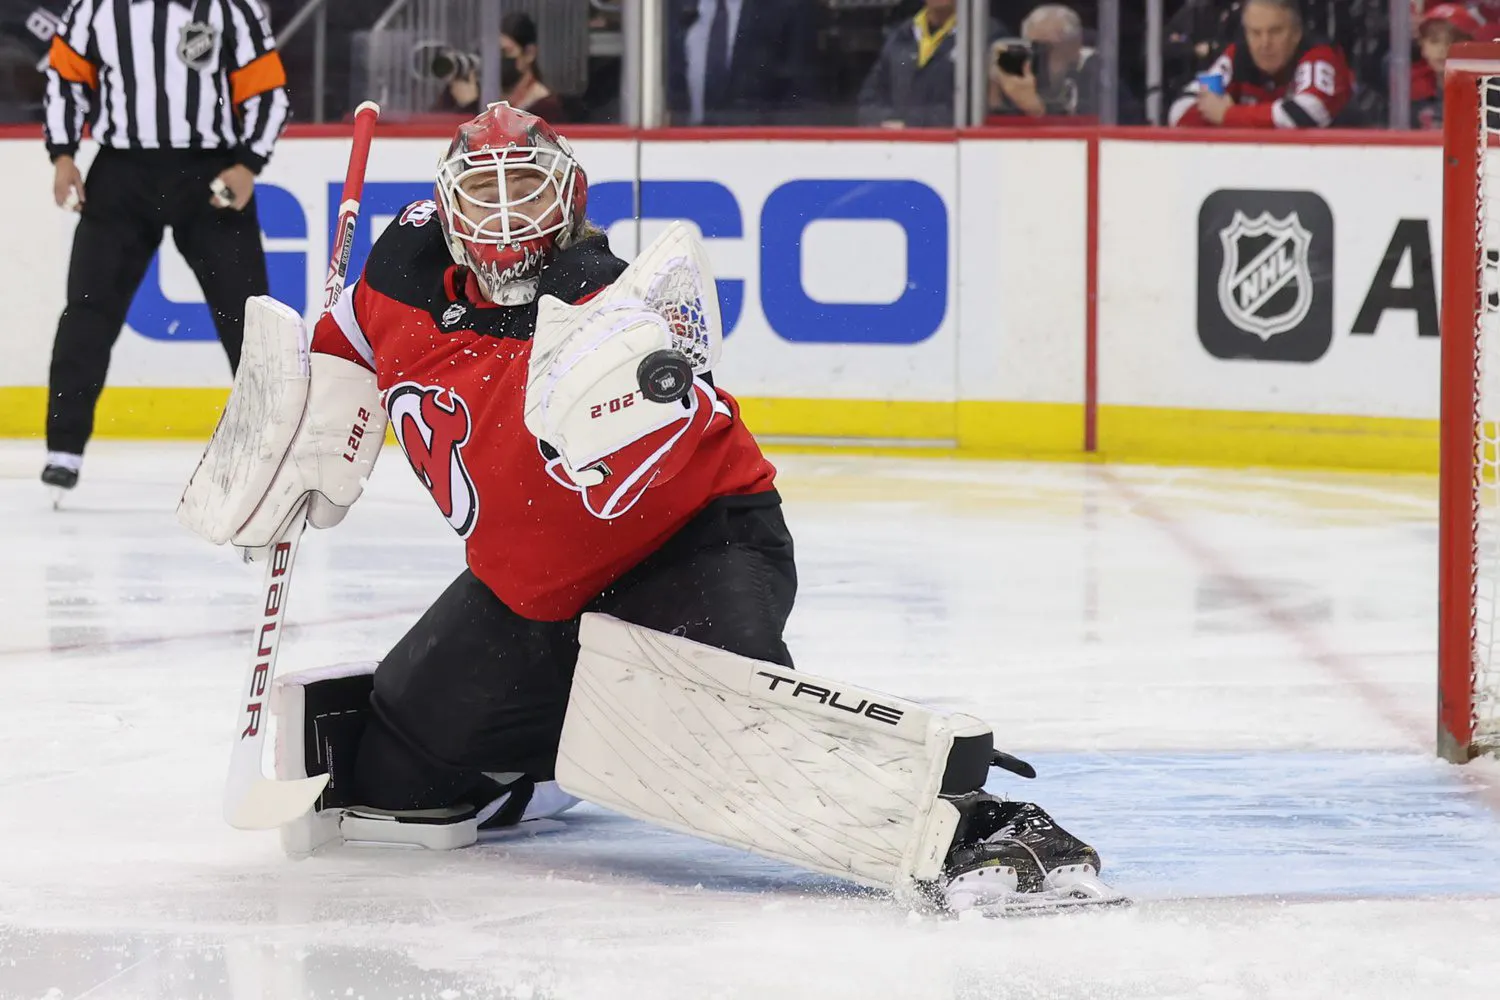 Where Do the New Jersey Devils Stack Up in Metropolitan Division?